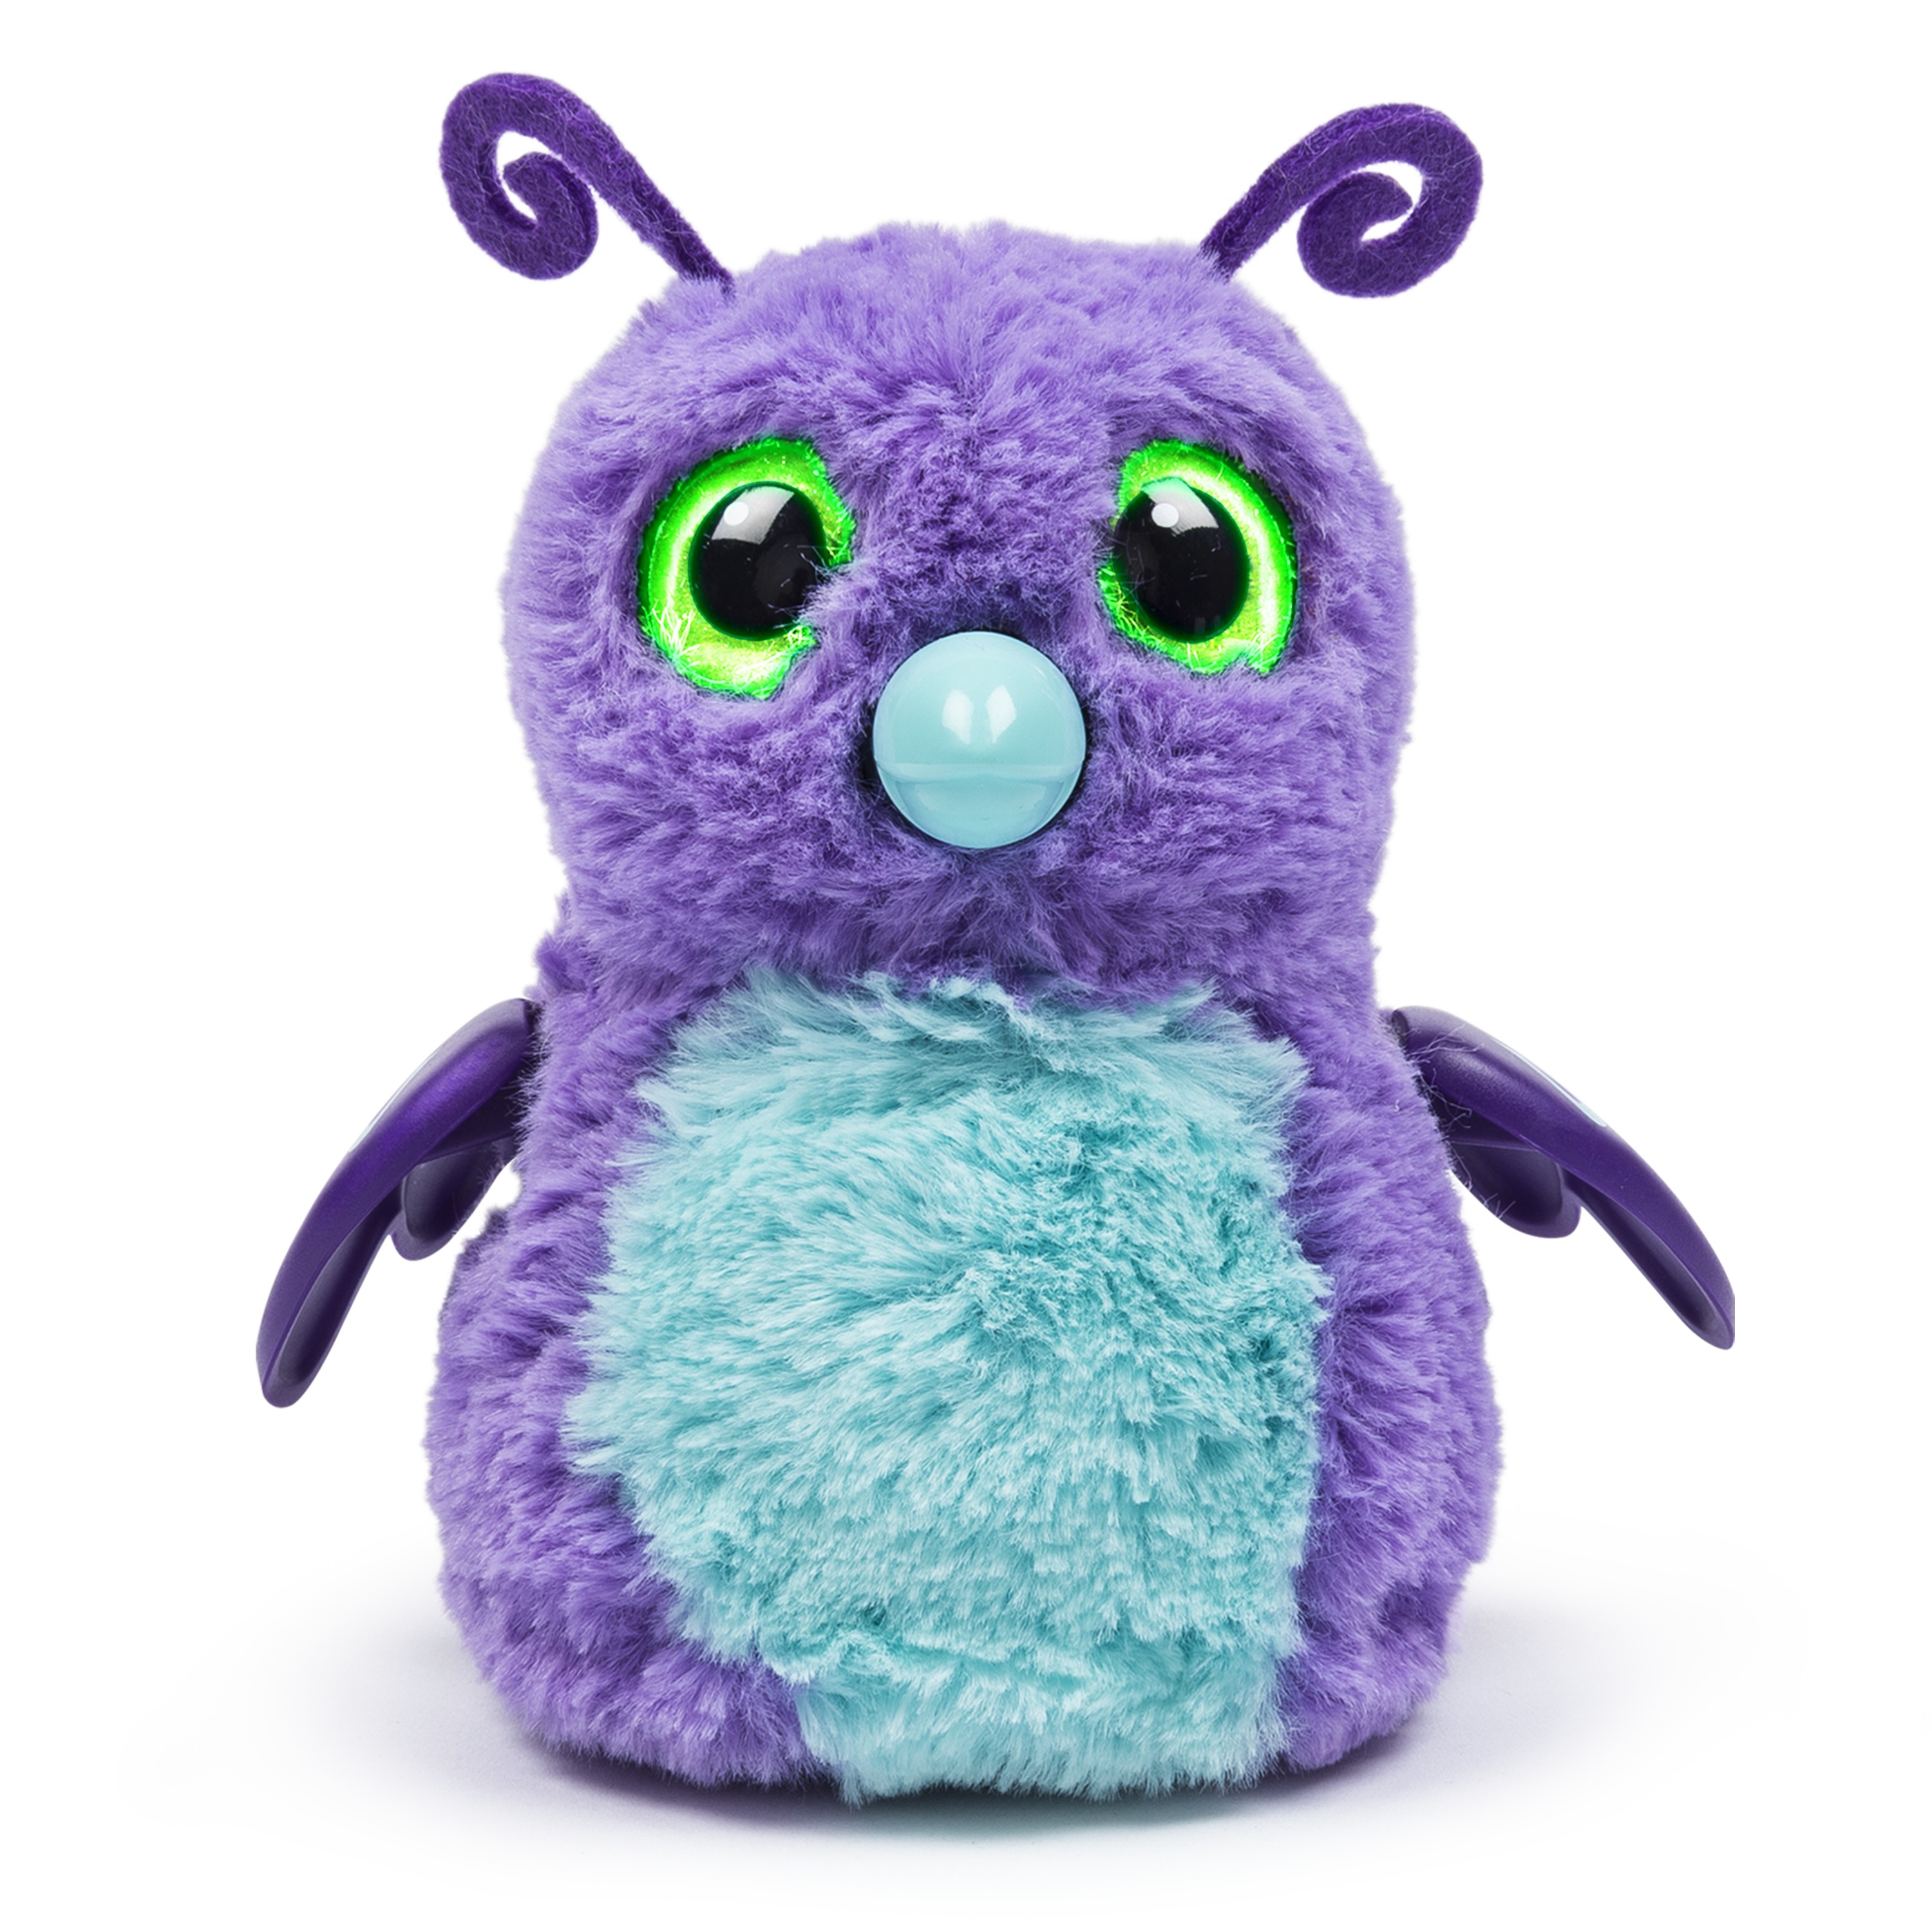 Hatchimals - Hatching Egg - Interactive Creature - Burtle - Purple/Teal Egg - Walmart Exclusive by Spin Master - image 4 of 7